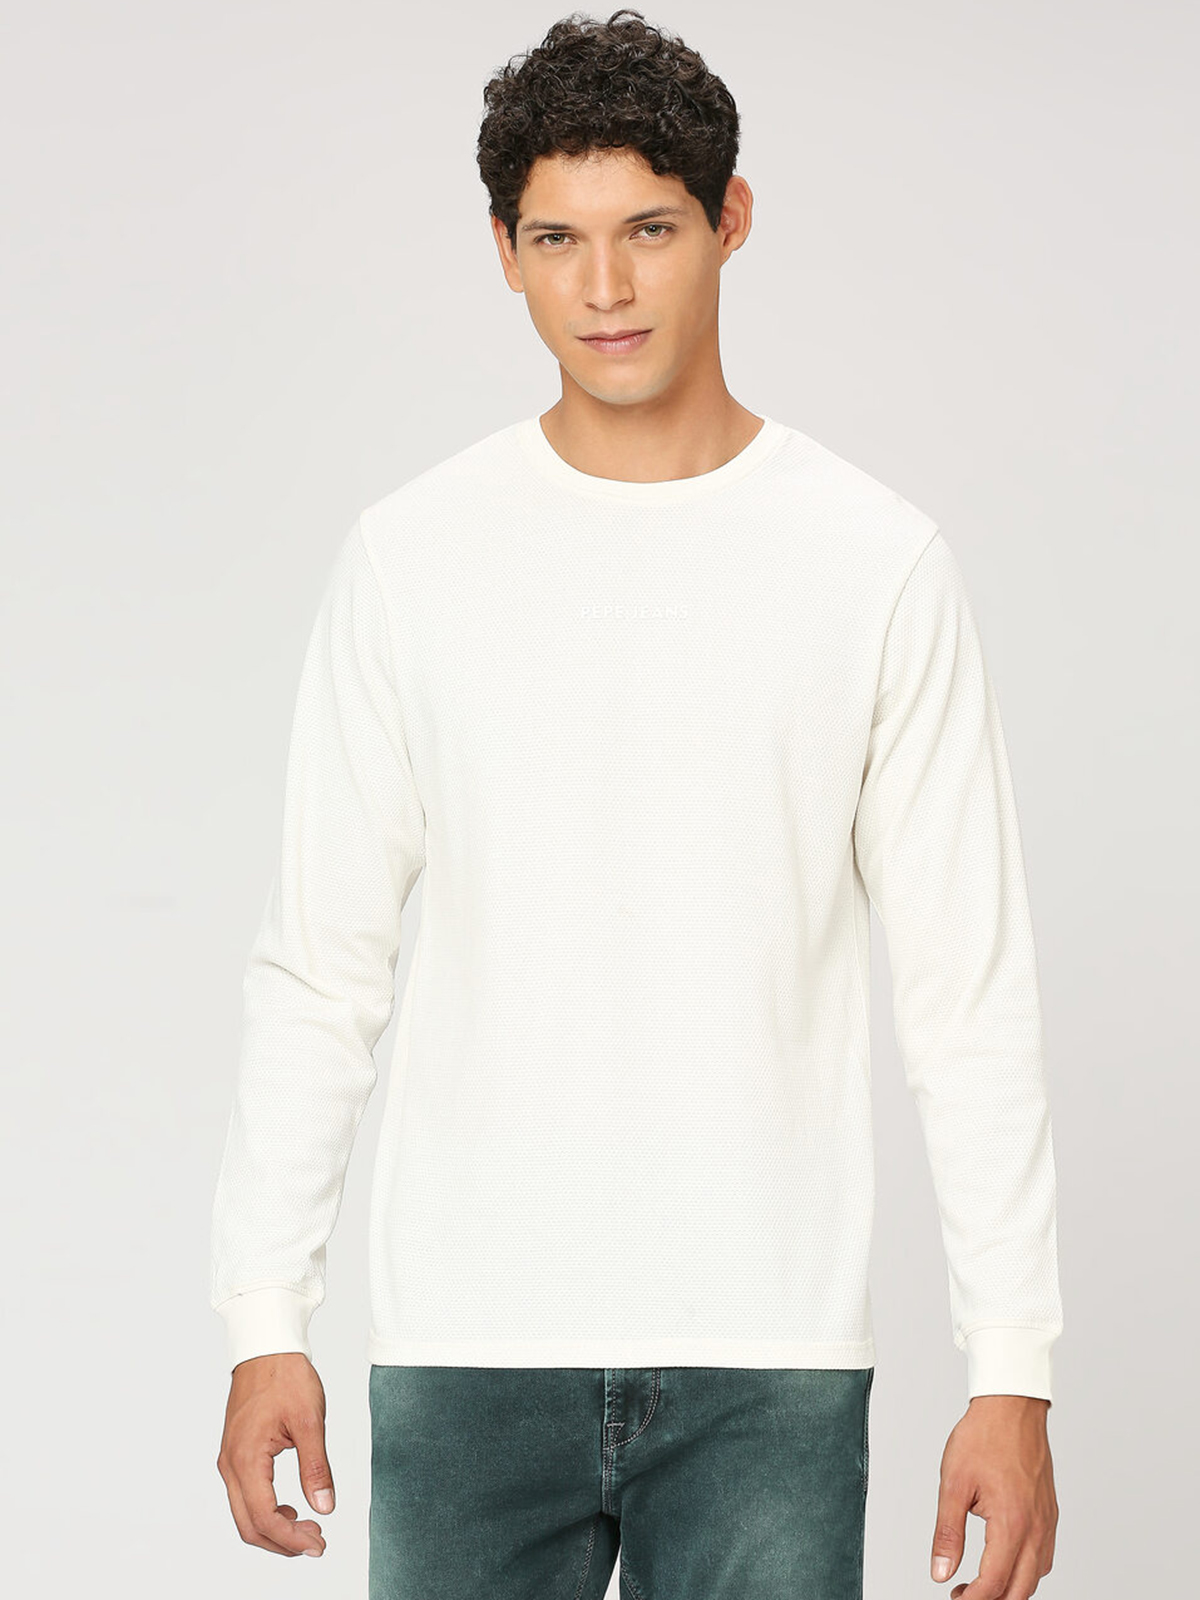 Pepe Jeans plain knitted t - white shirt G3-MTS16615